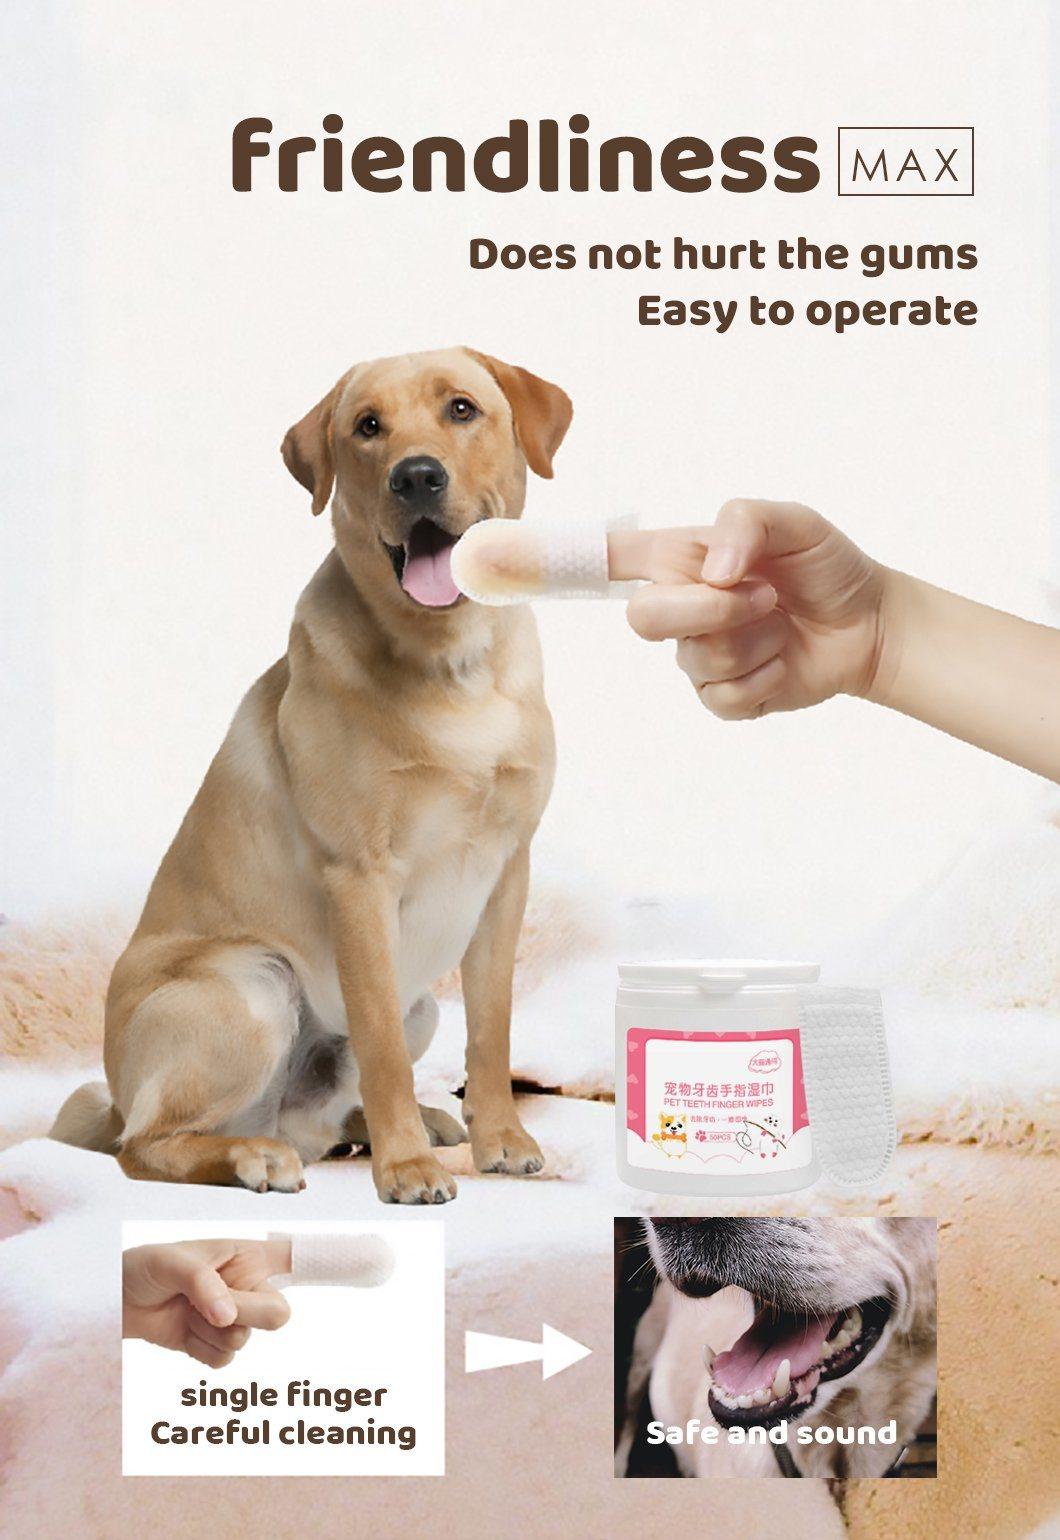 Dogs Pet Wipes Tears Feet Assholes Cats Wet Paper Towels Pet Cleaning Products Wash Free Deodorization Cleaning Bathing